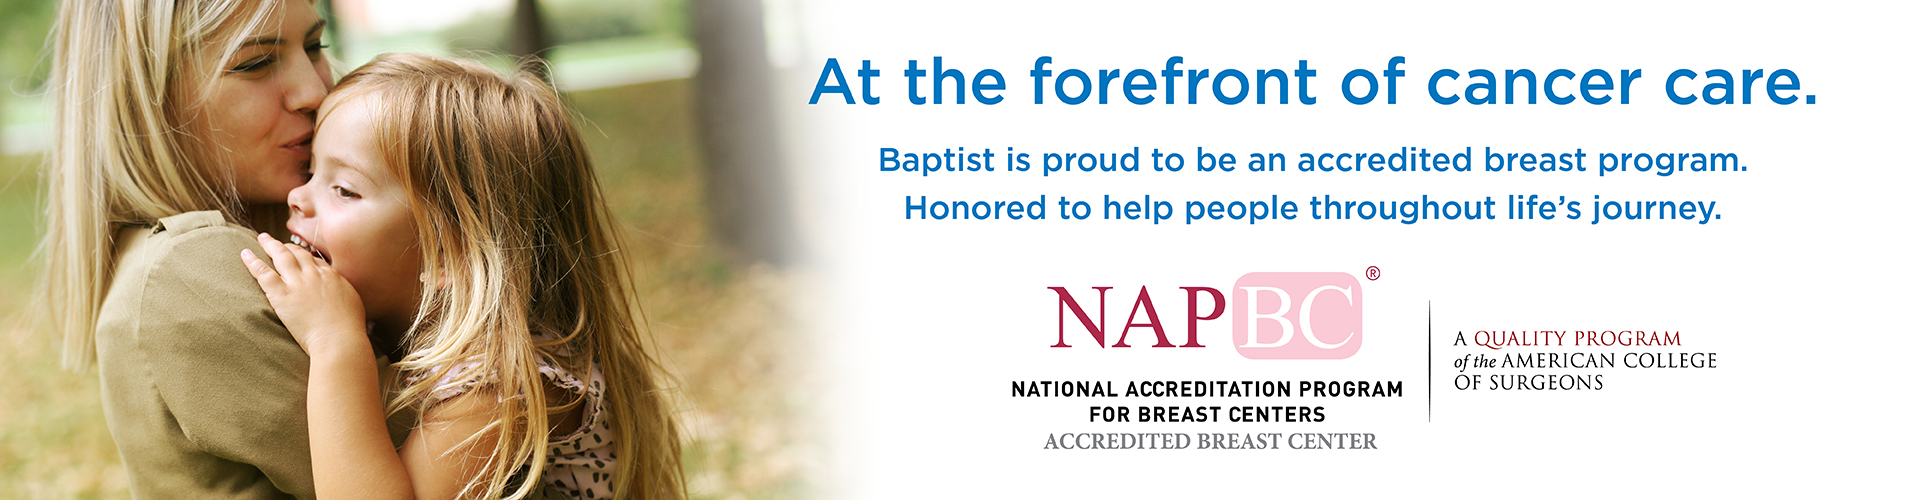 At the forefront of cancer care. NAPBC 